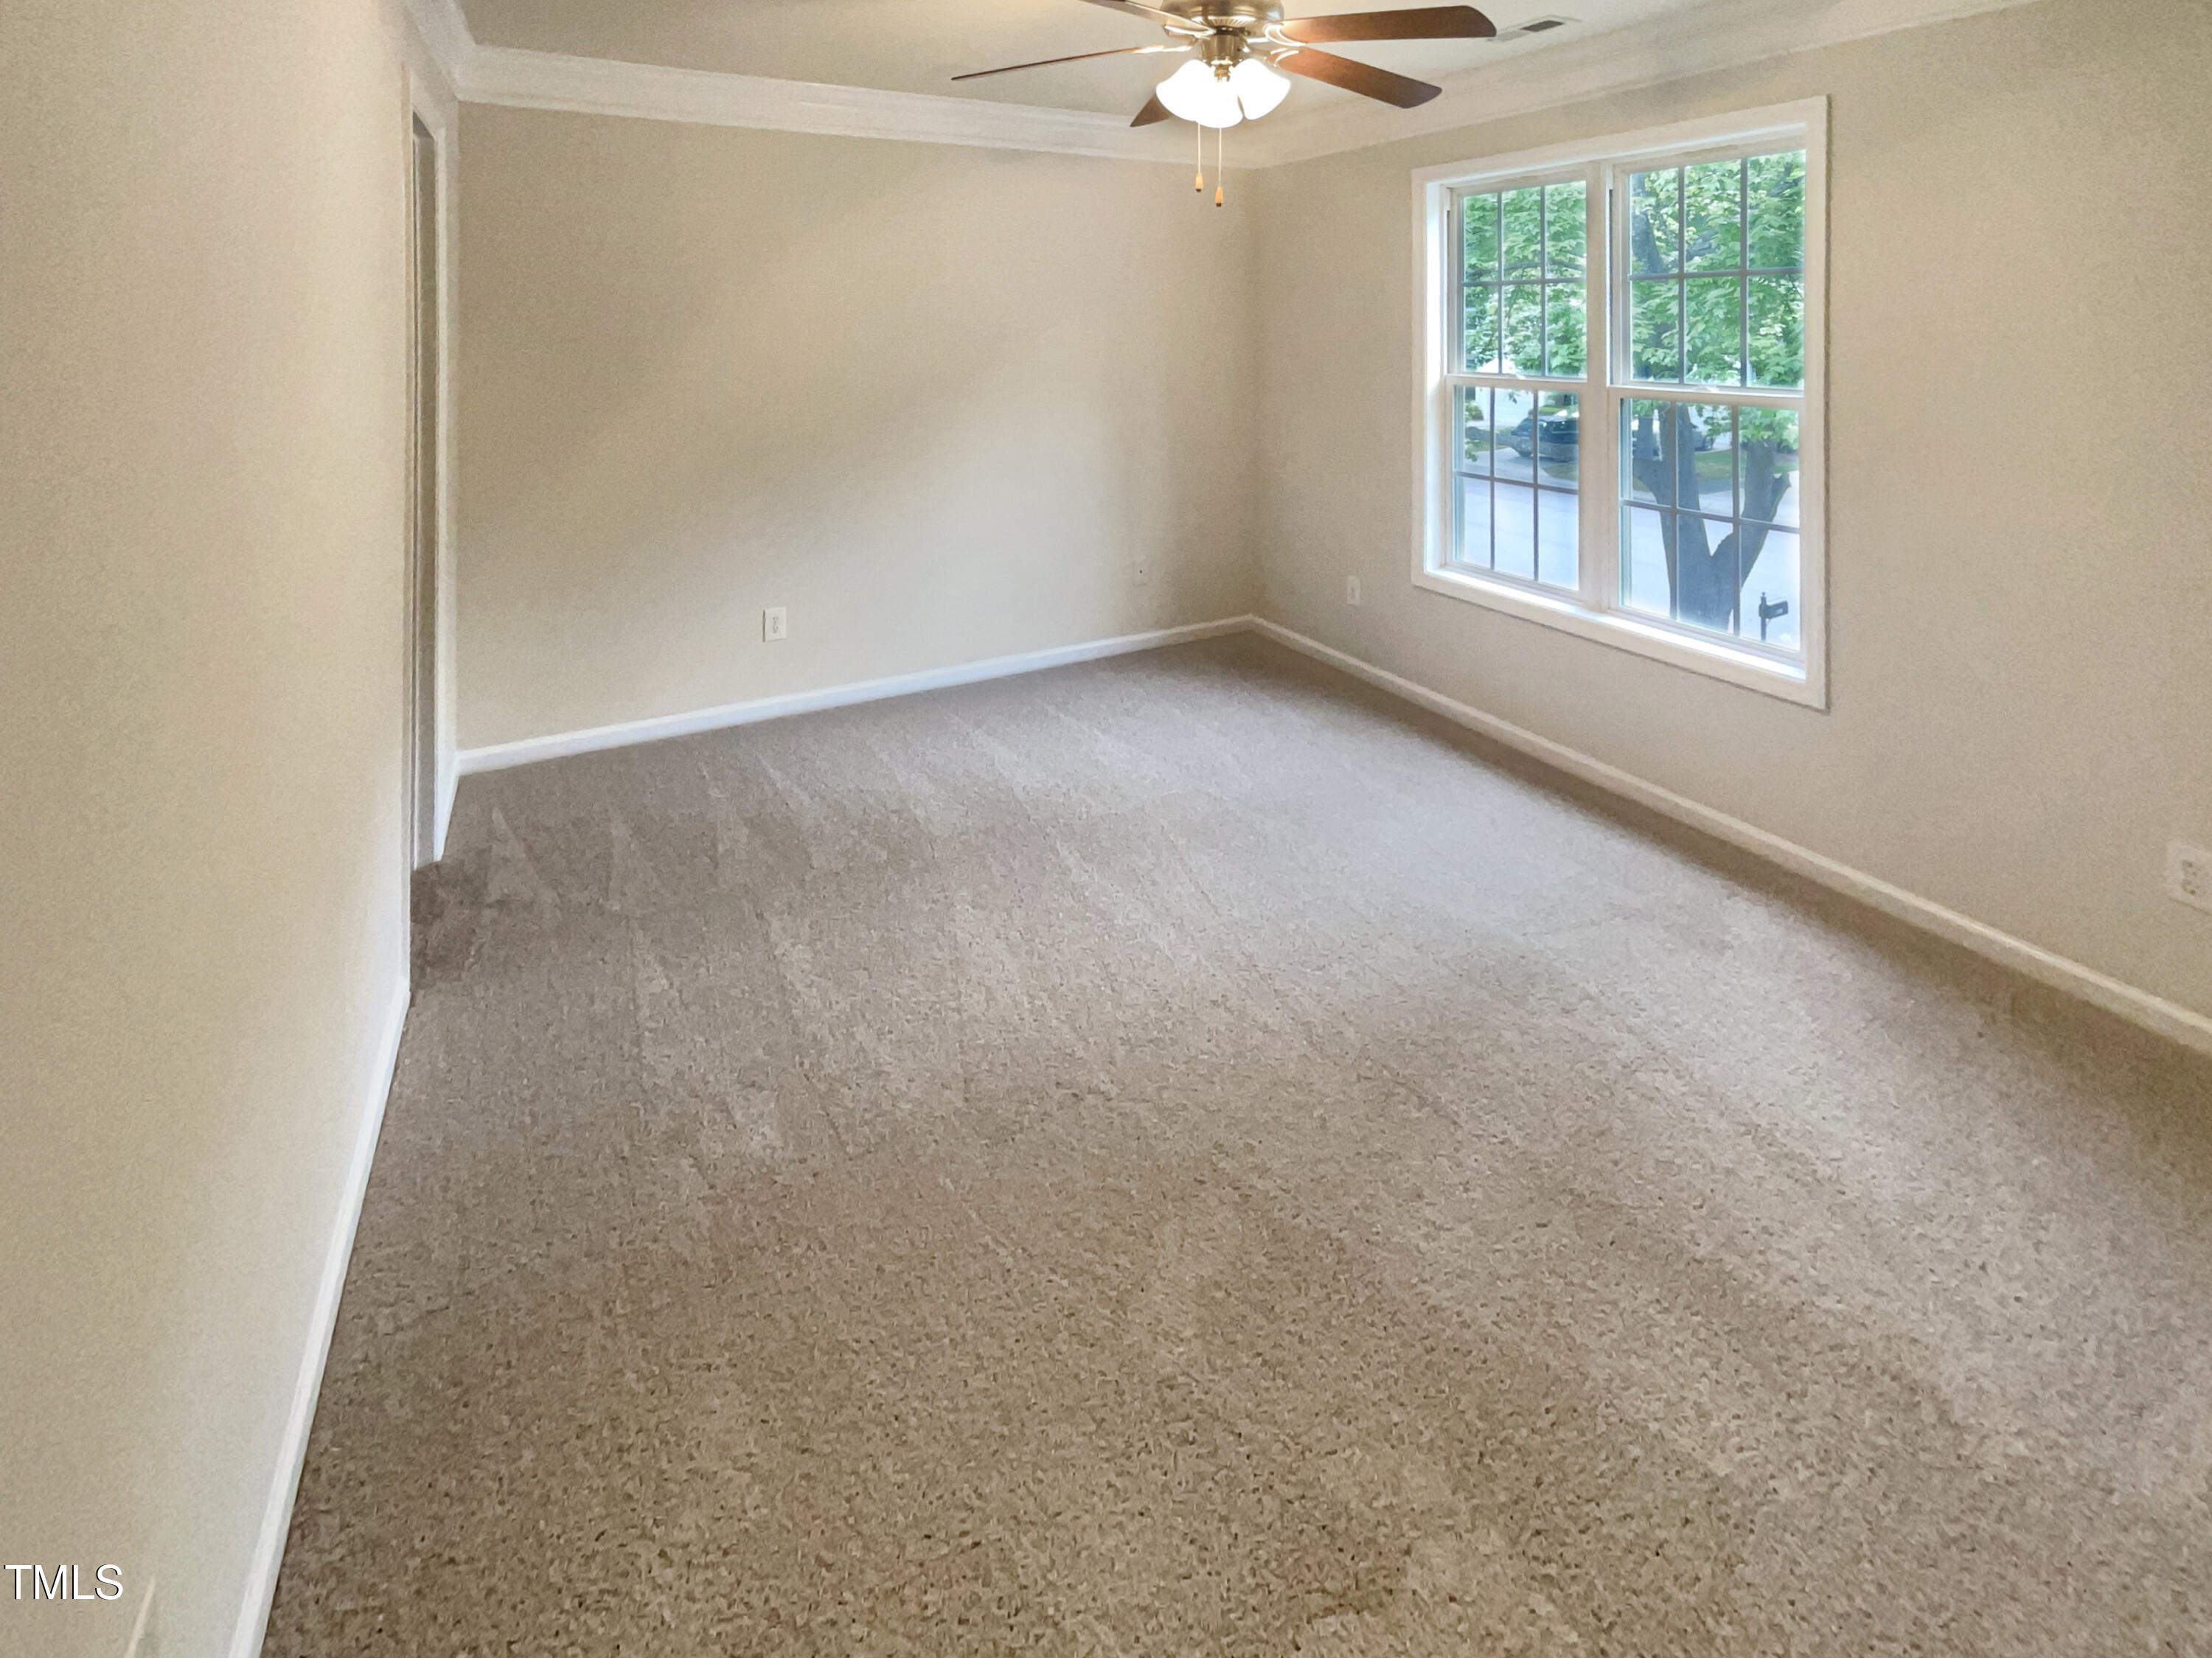 Photo 11 of 16 of 3102 Coxindale Drive townhome